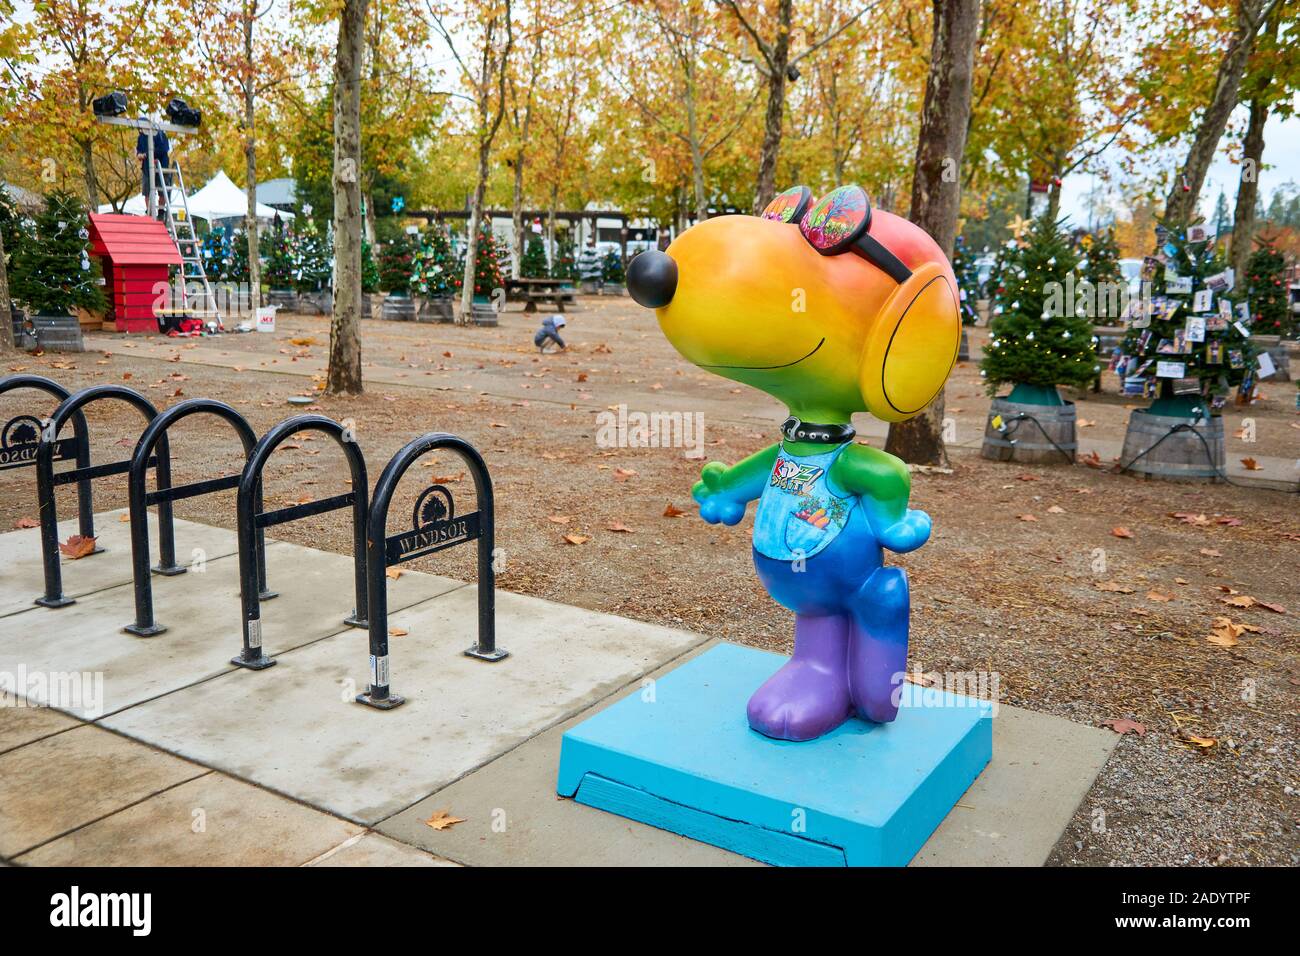 A rainbow-colored statue of Snoopy comic character near bike stands and decorated Christmas trees at Windsor Town Green, in California. Stock Photo